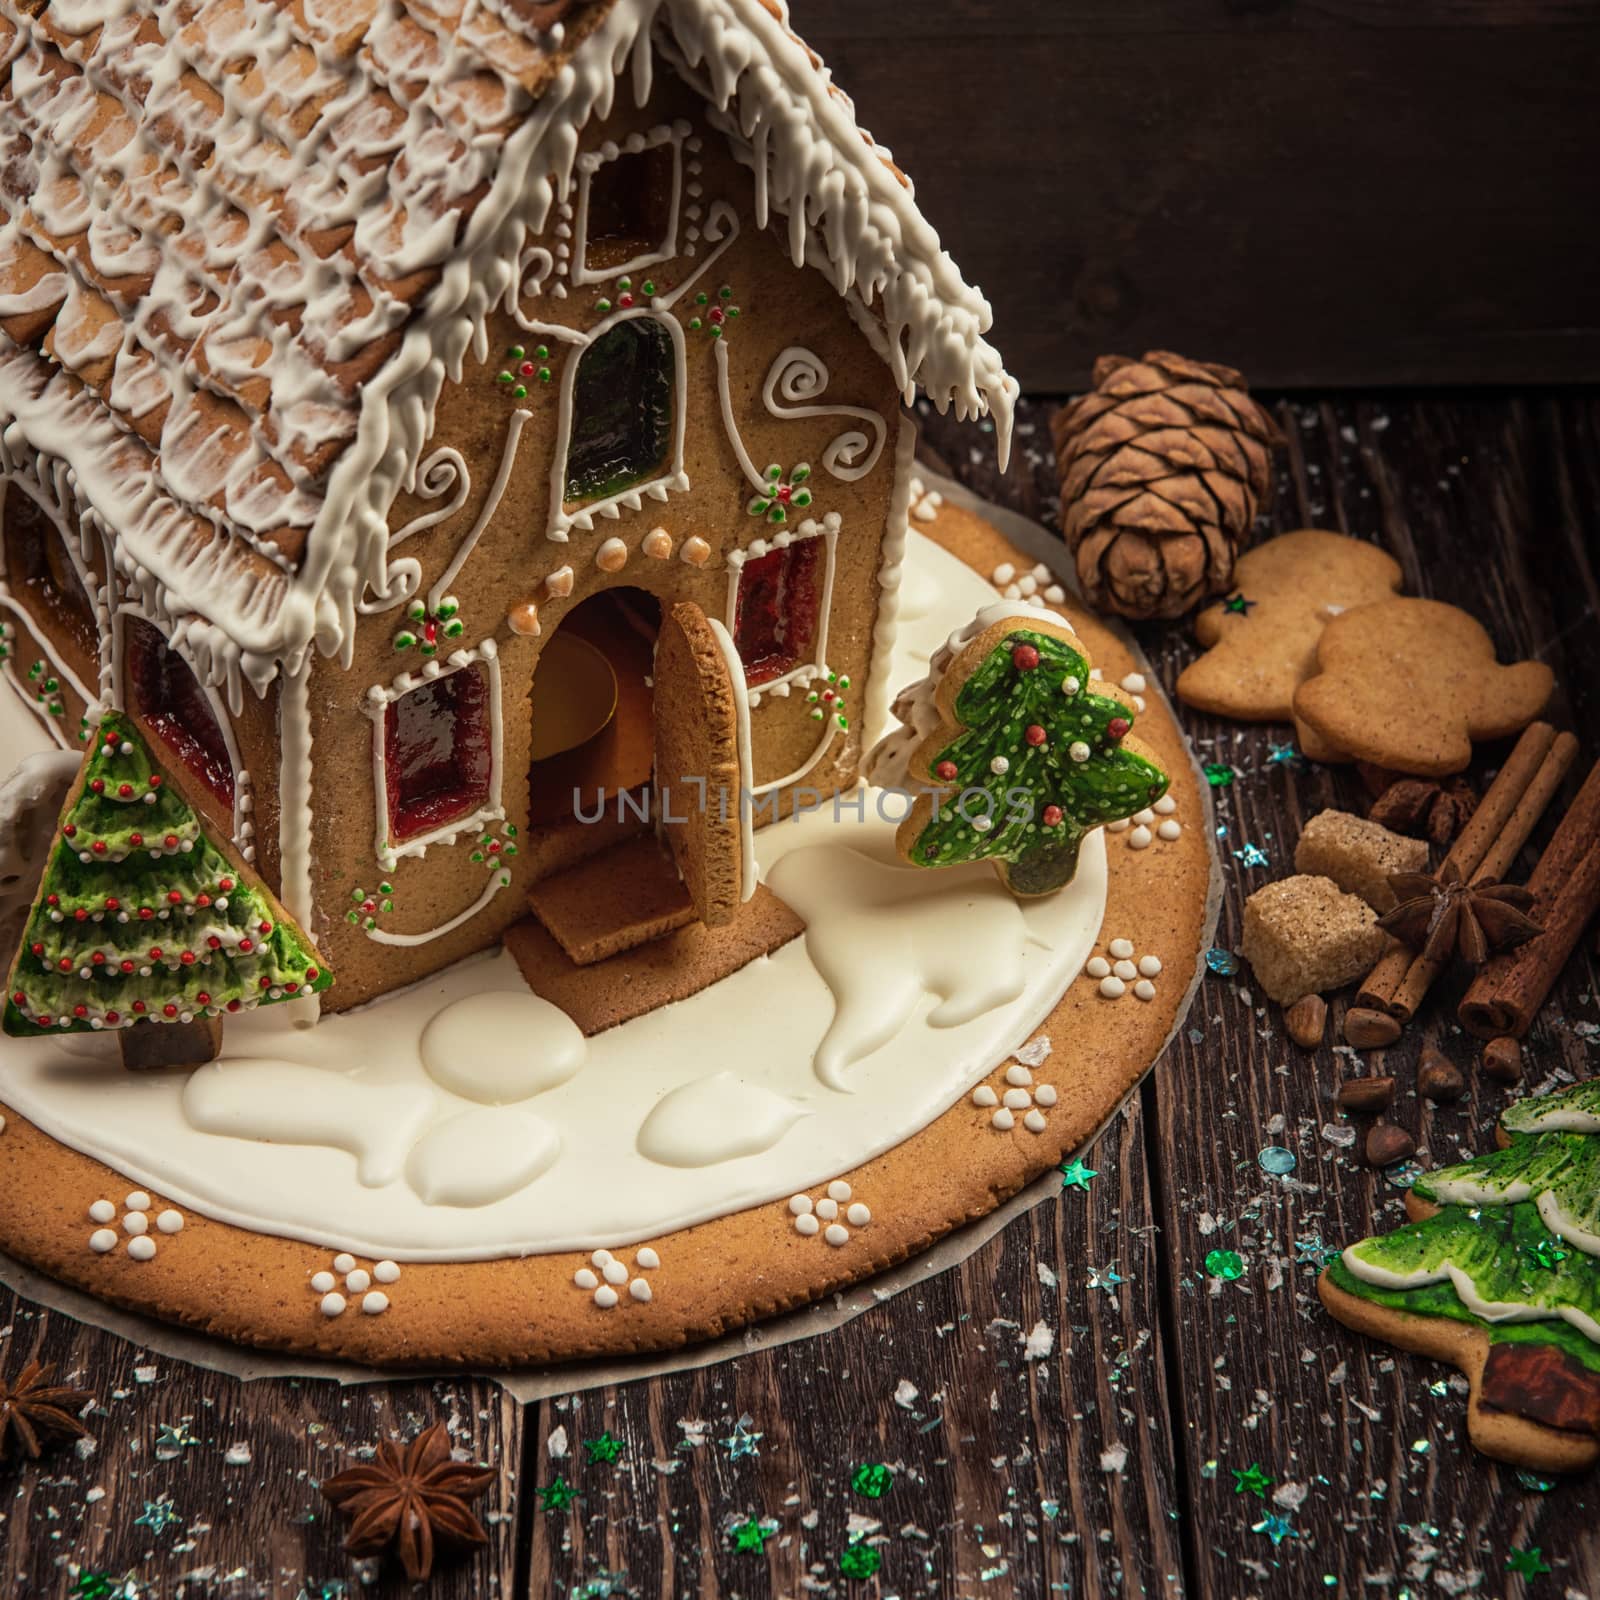 Homemade gingerbread house by rusak